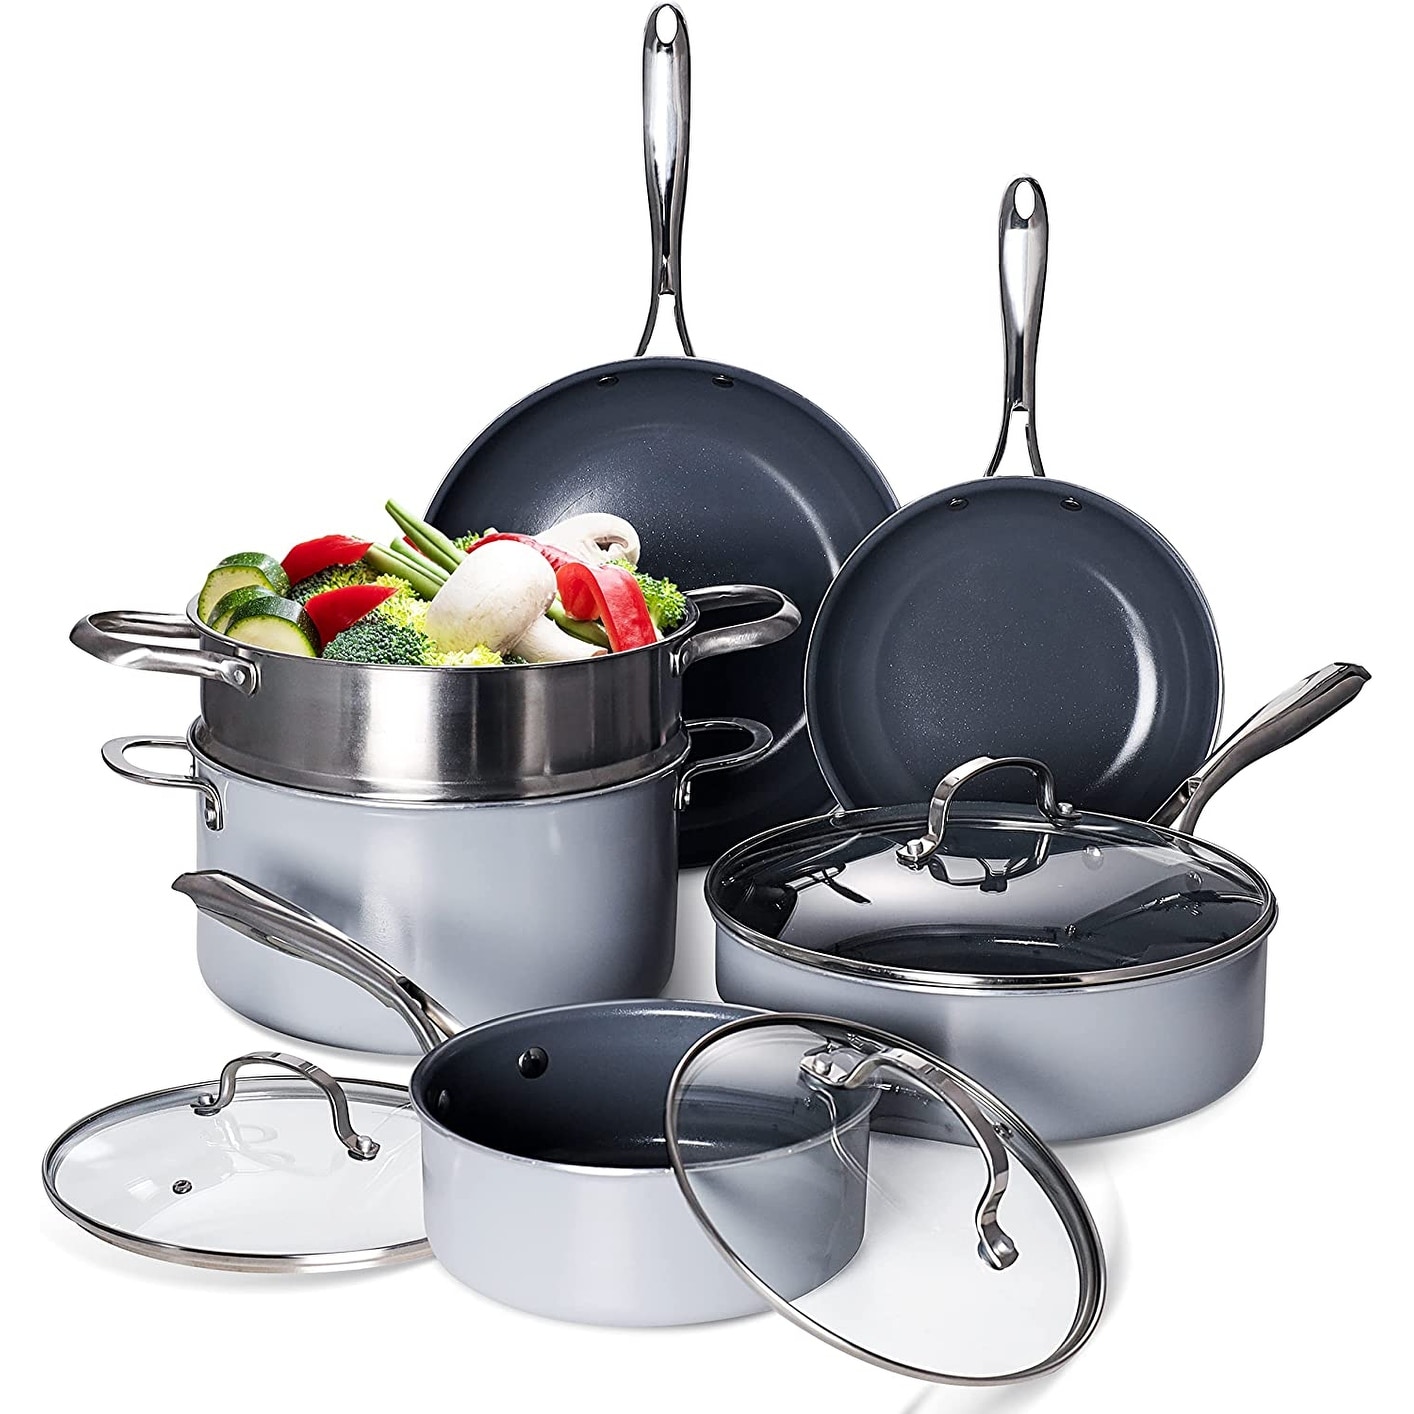 https://ak1.ostkcdn.com/images/products/is/images/direct/476d45577fc86011620700b1f4144cca7262afa2/Non-Stick-Pots-and-Pans-Set-13pcs-Cookware-Set%2C-Steamer-Basket%2C-Stockpot-with-Lid%2C-Saucepan-with-Lid.jpg